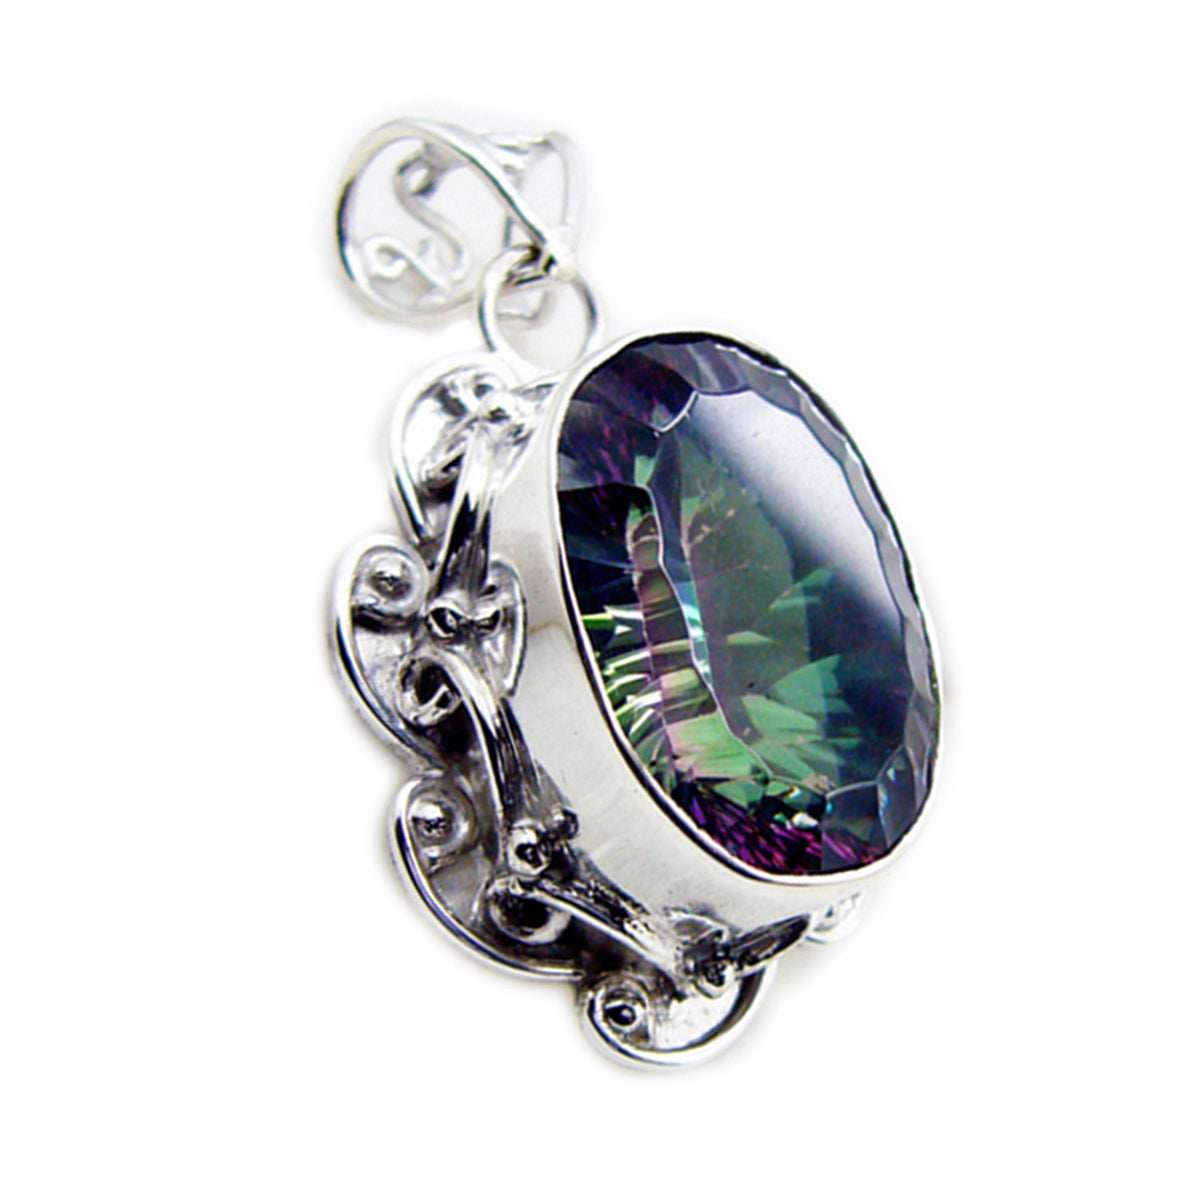 Riyo Aesthetic Gems Oval Faceted Multi Color Mystic Quartz Silver Pendant Gift For Wife